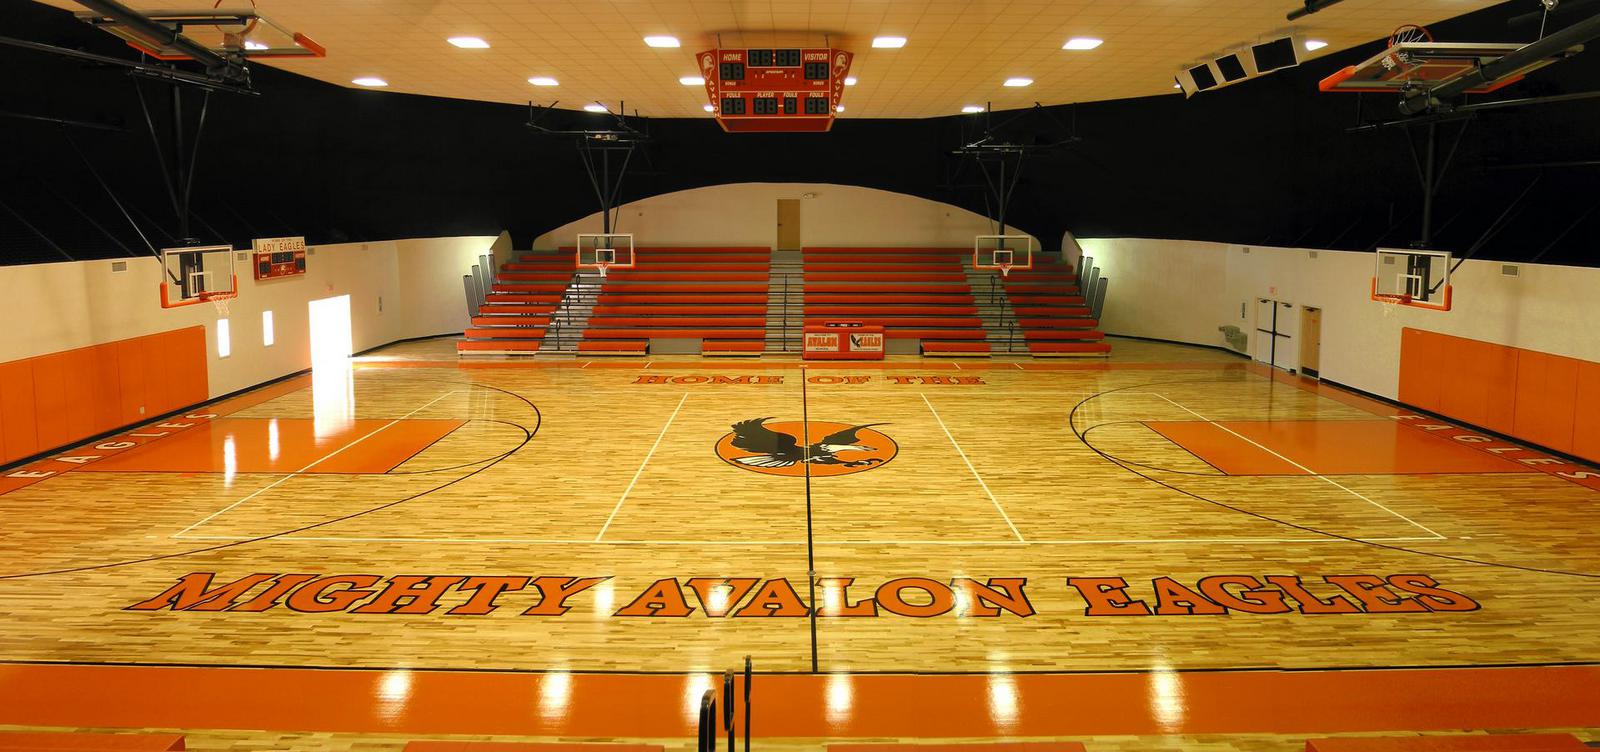 The competition court gymnasium seats 720.